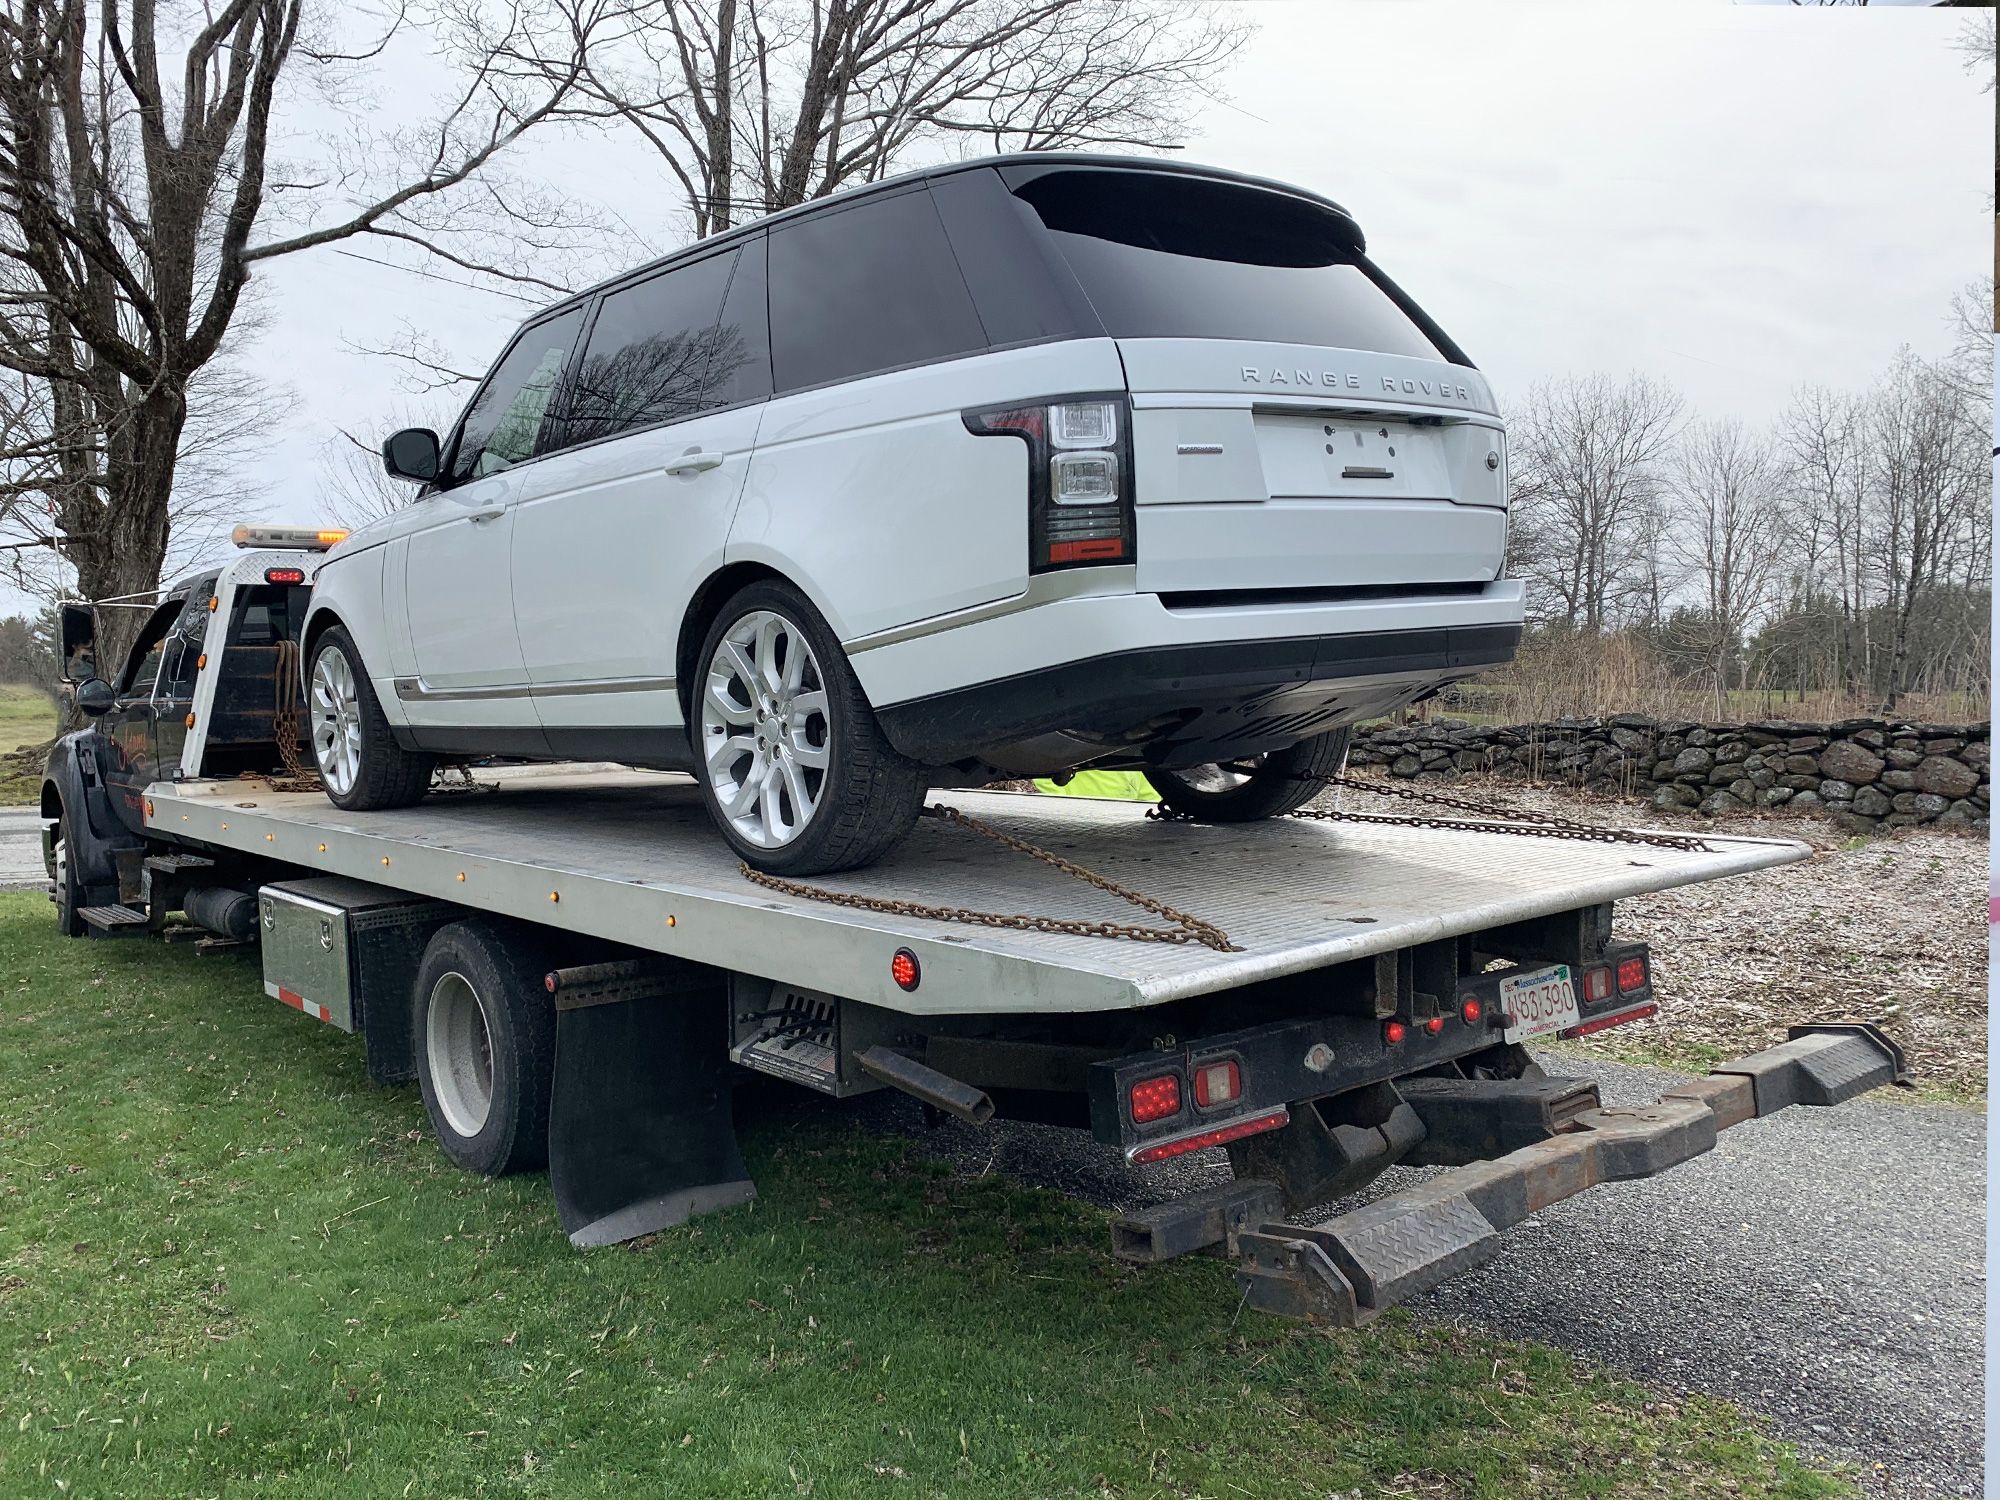 Towing Range Rover SUV